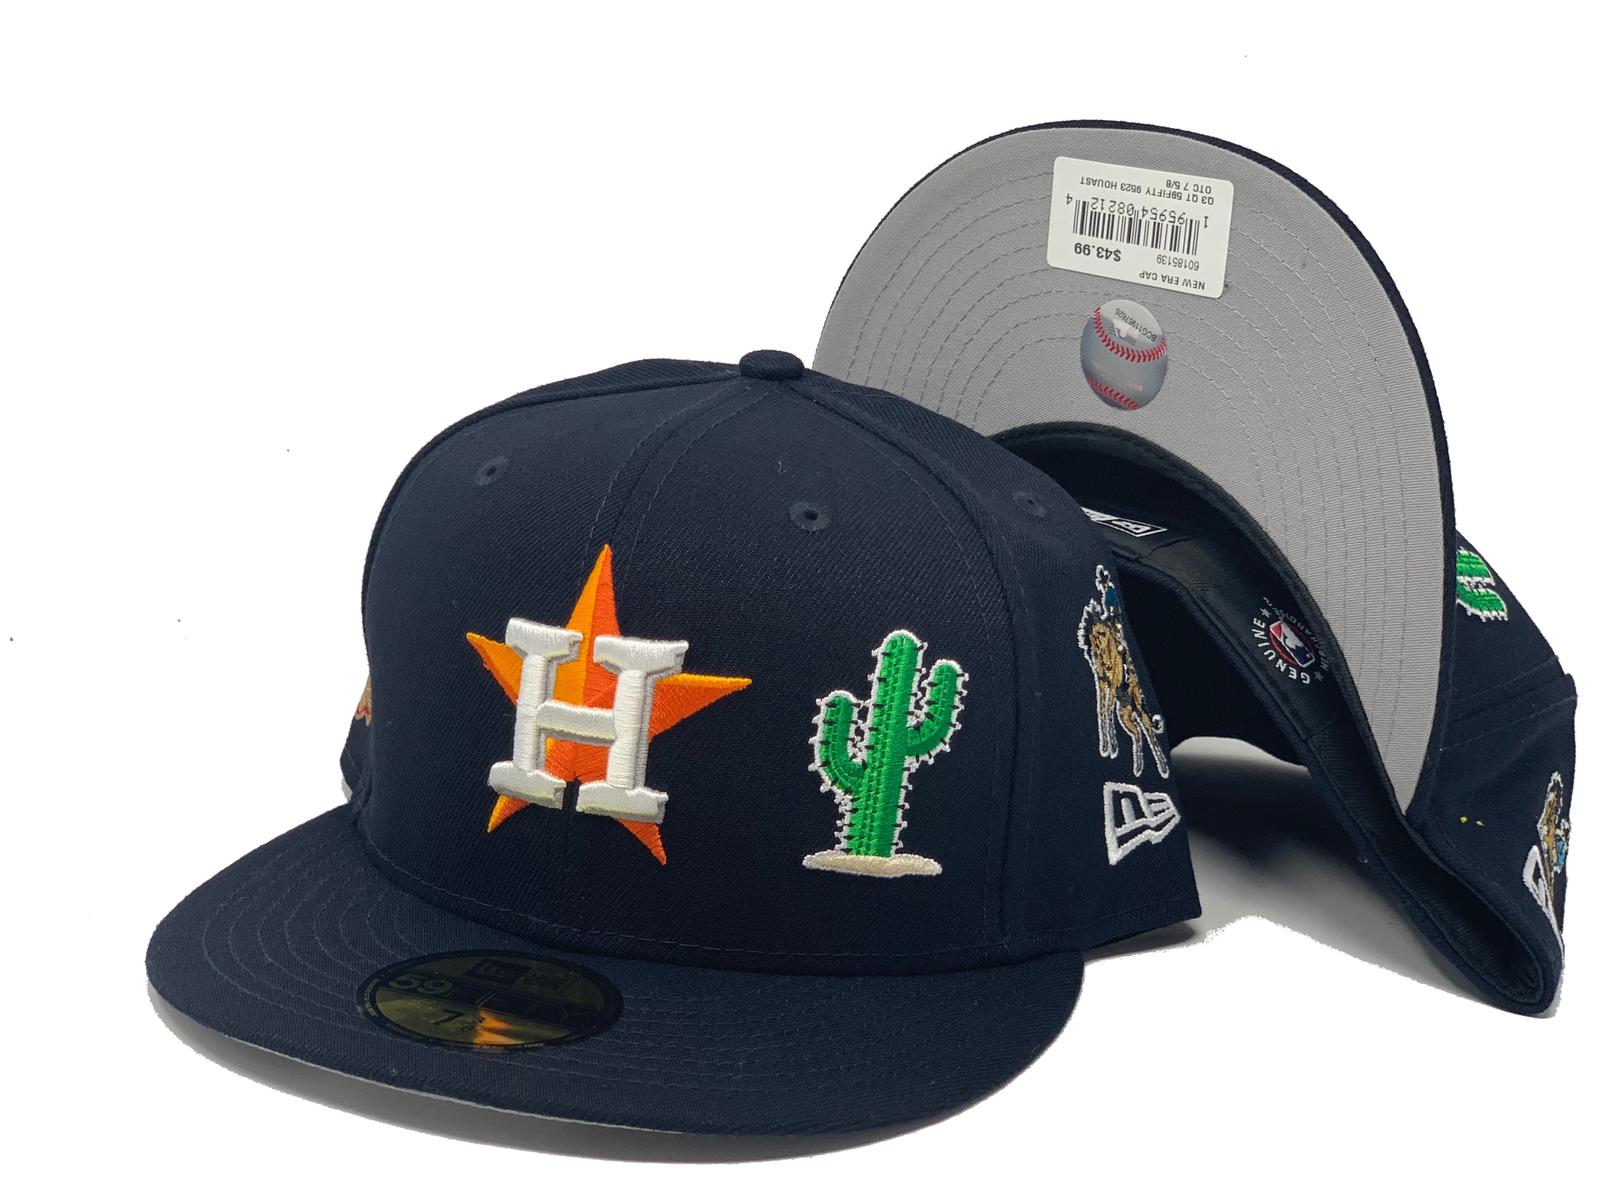 discount deals on sale Houston New Fitted Astros Hat New 'B' Era